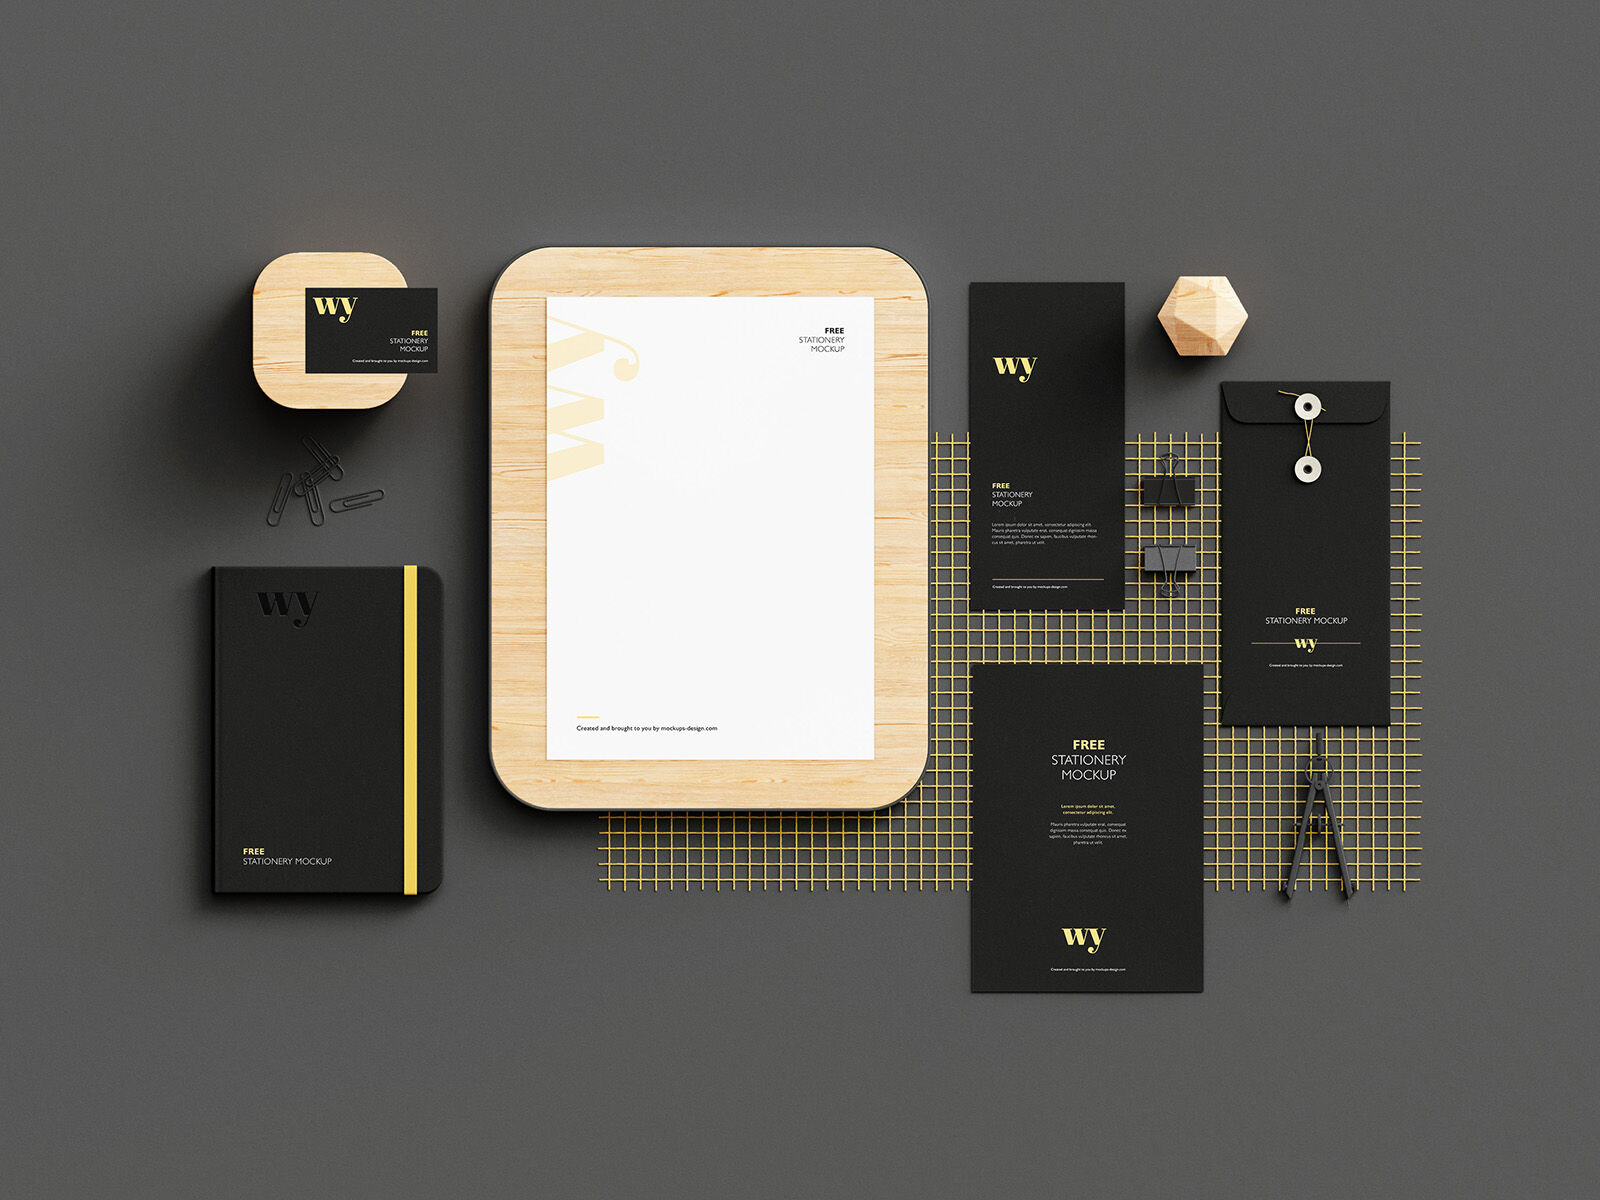 7 Mockups of Stationery in Different Views FREE PSD